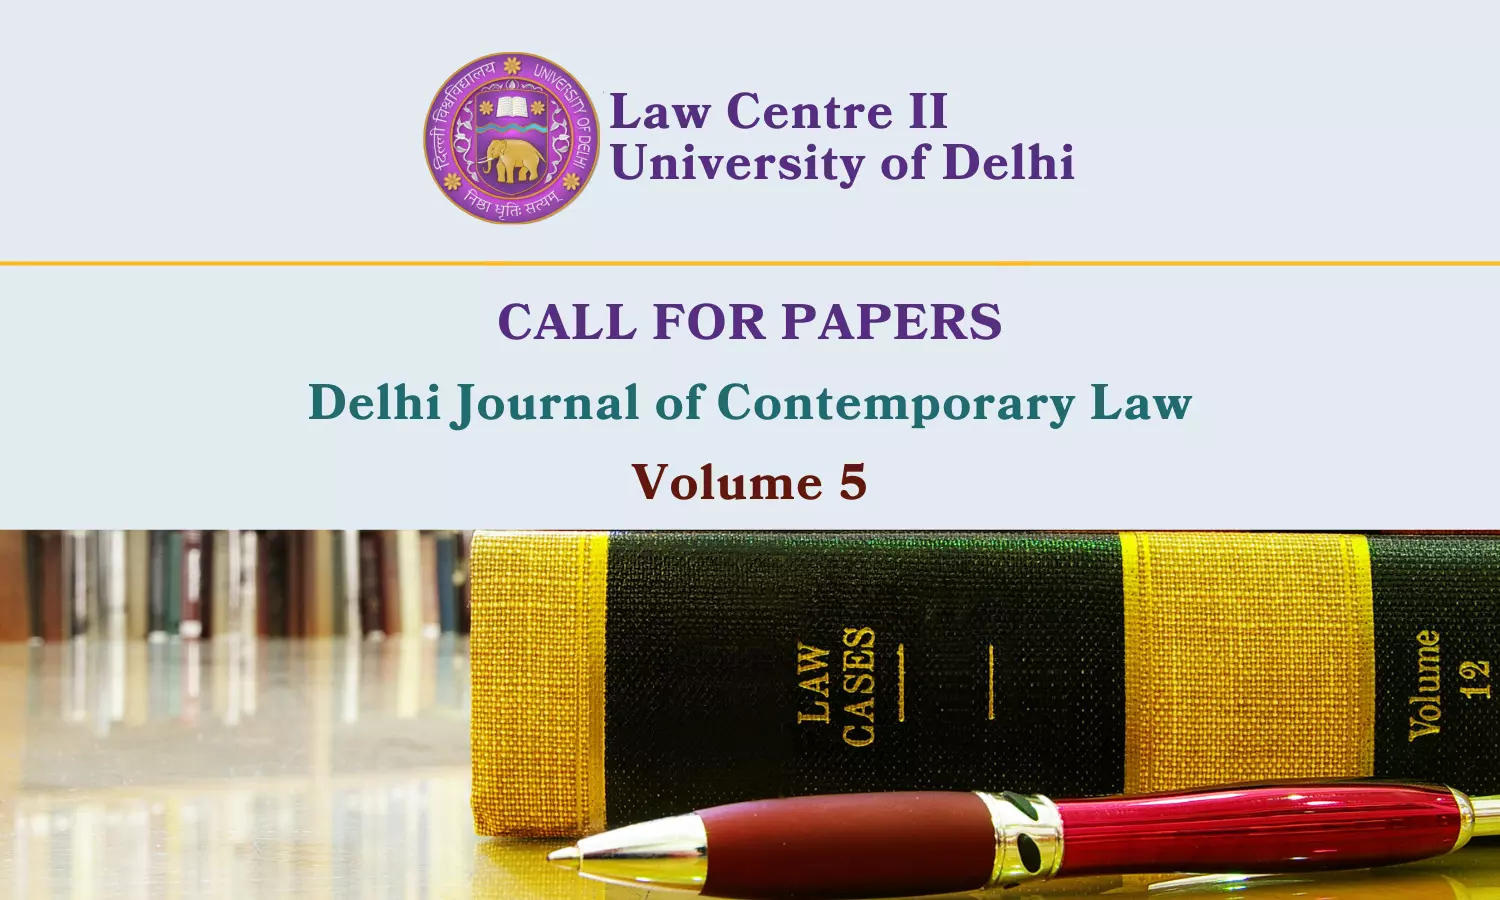 Call for Papers: Delhi Journal of Contemporary Law Volume 5 | Law Centre II, University of Delhi